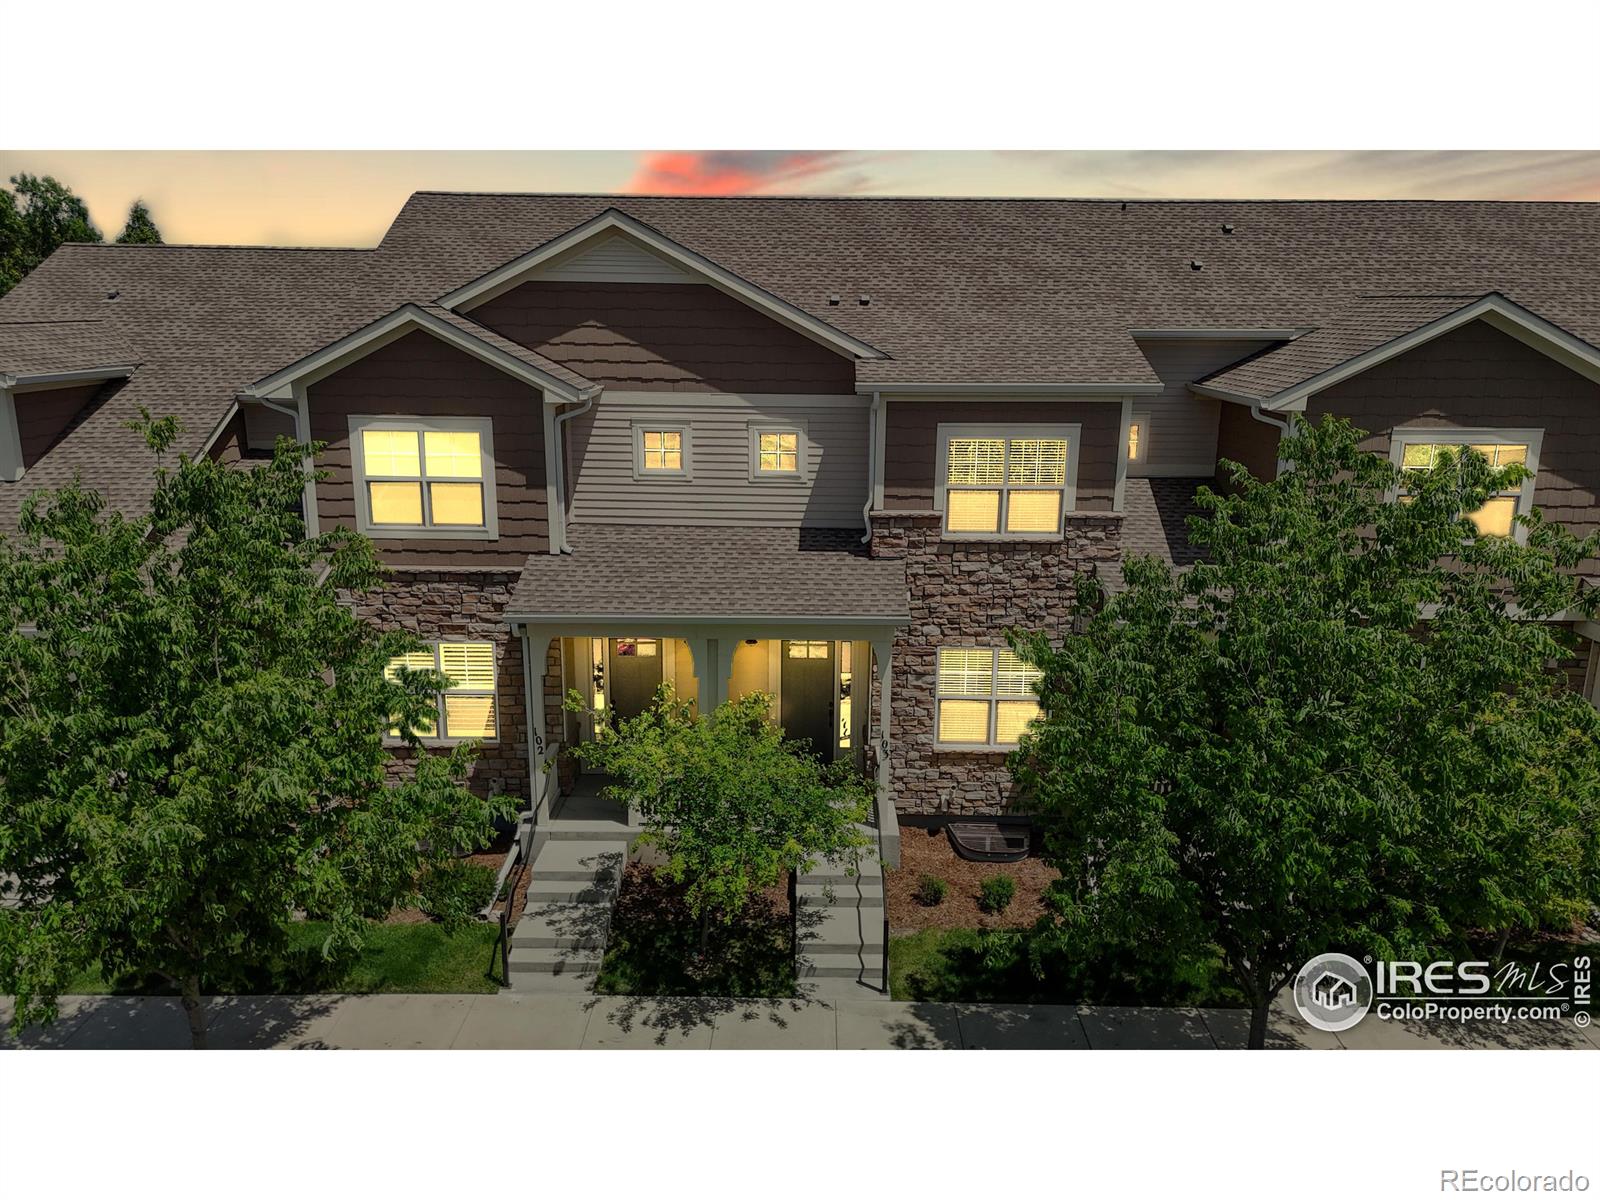 Report Image for 2708  Rockford Drive,Fort Collins, Colorado